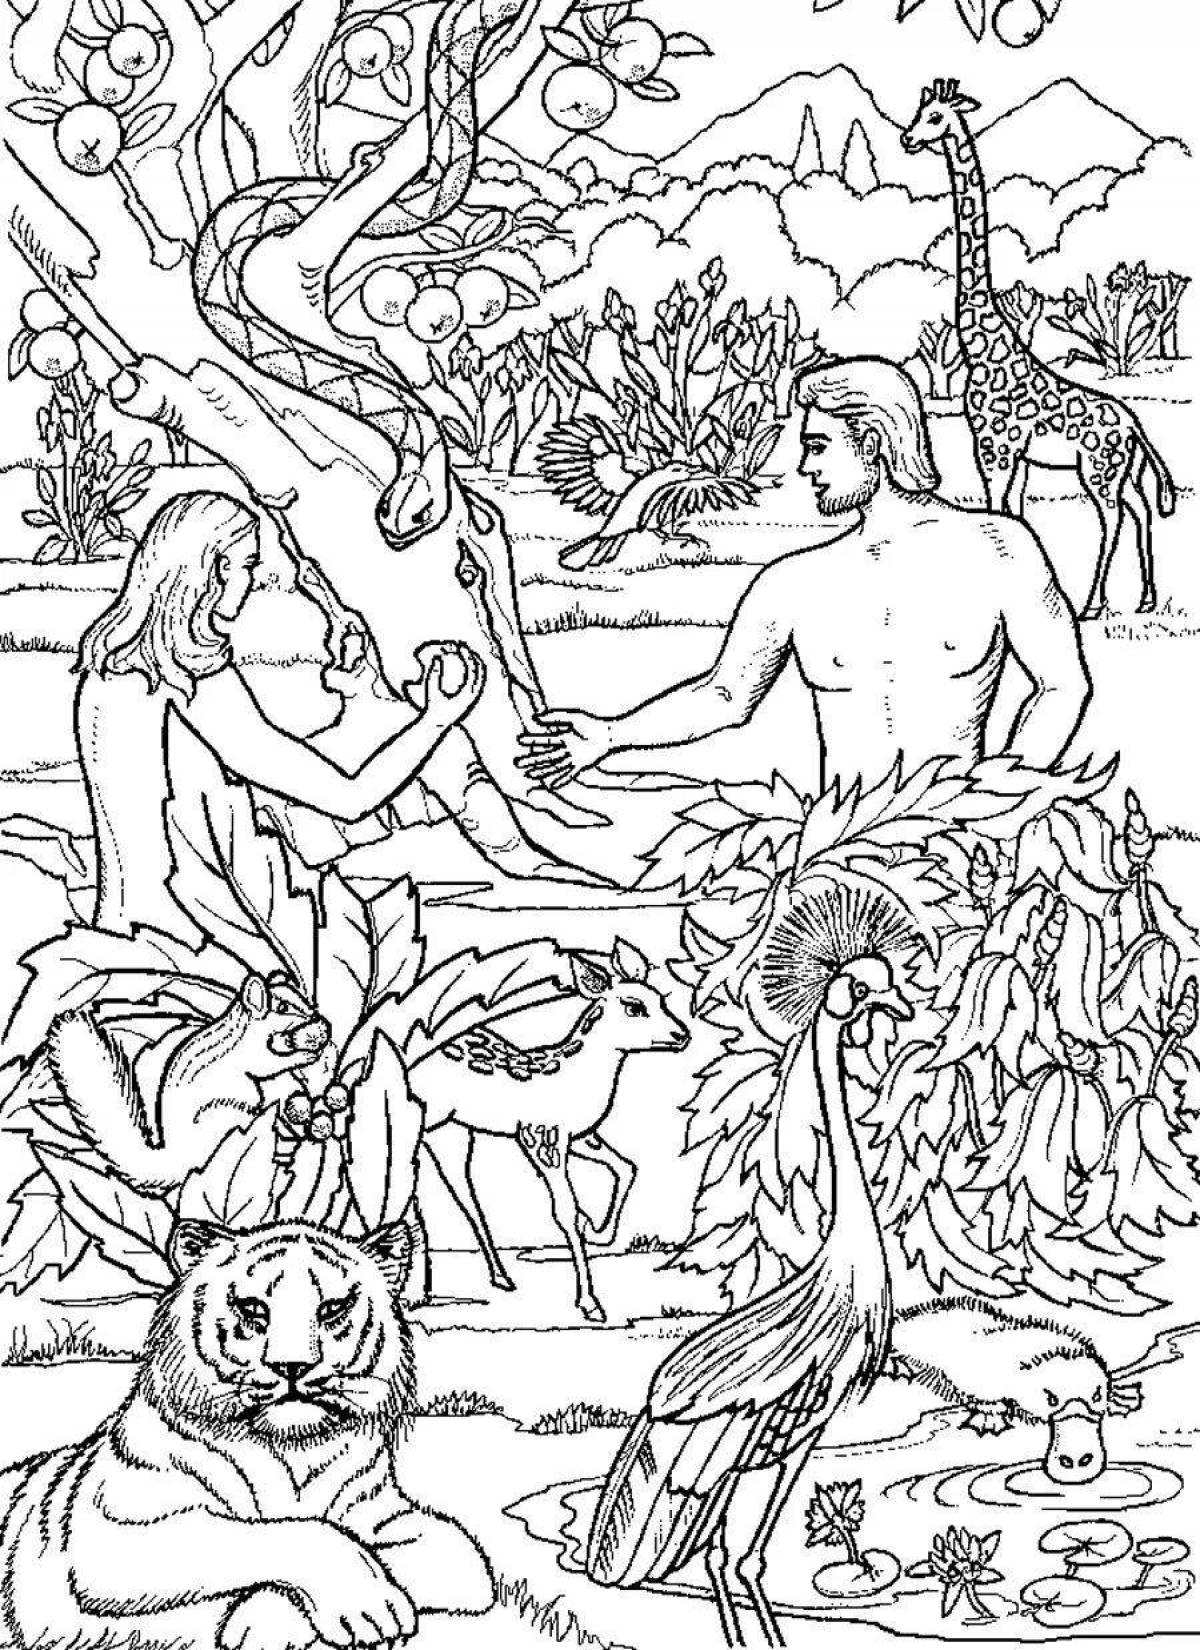 Coloring page charming adam and eve